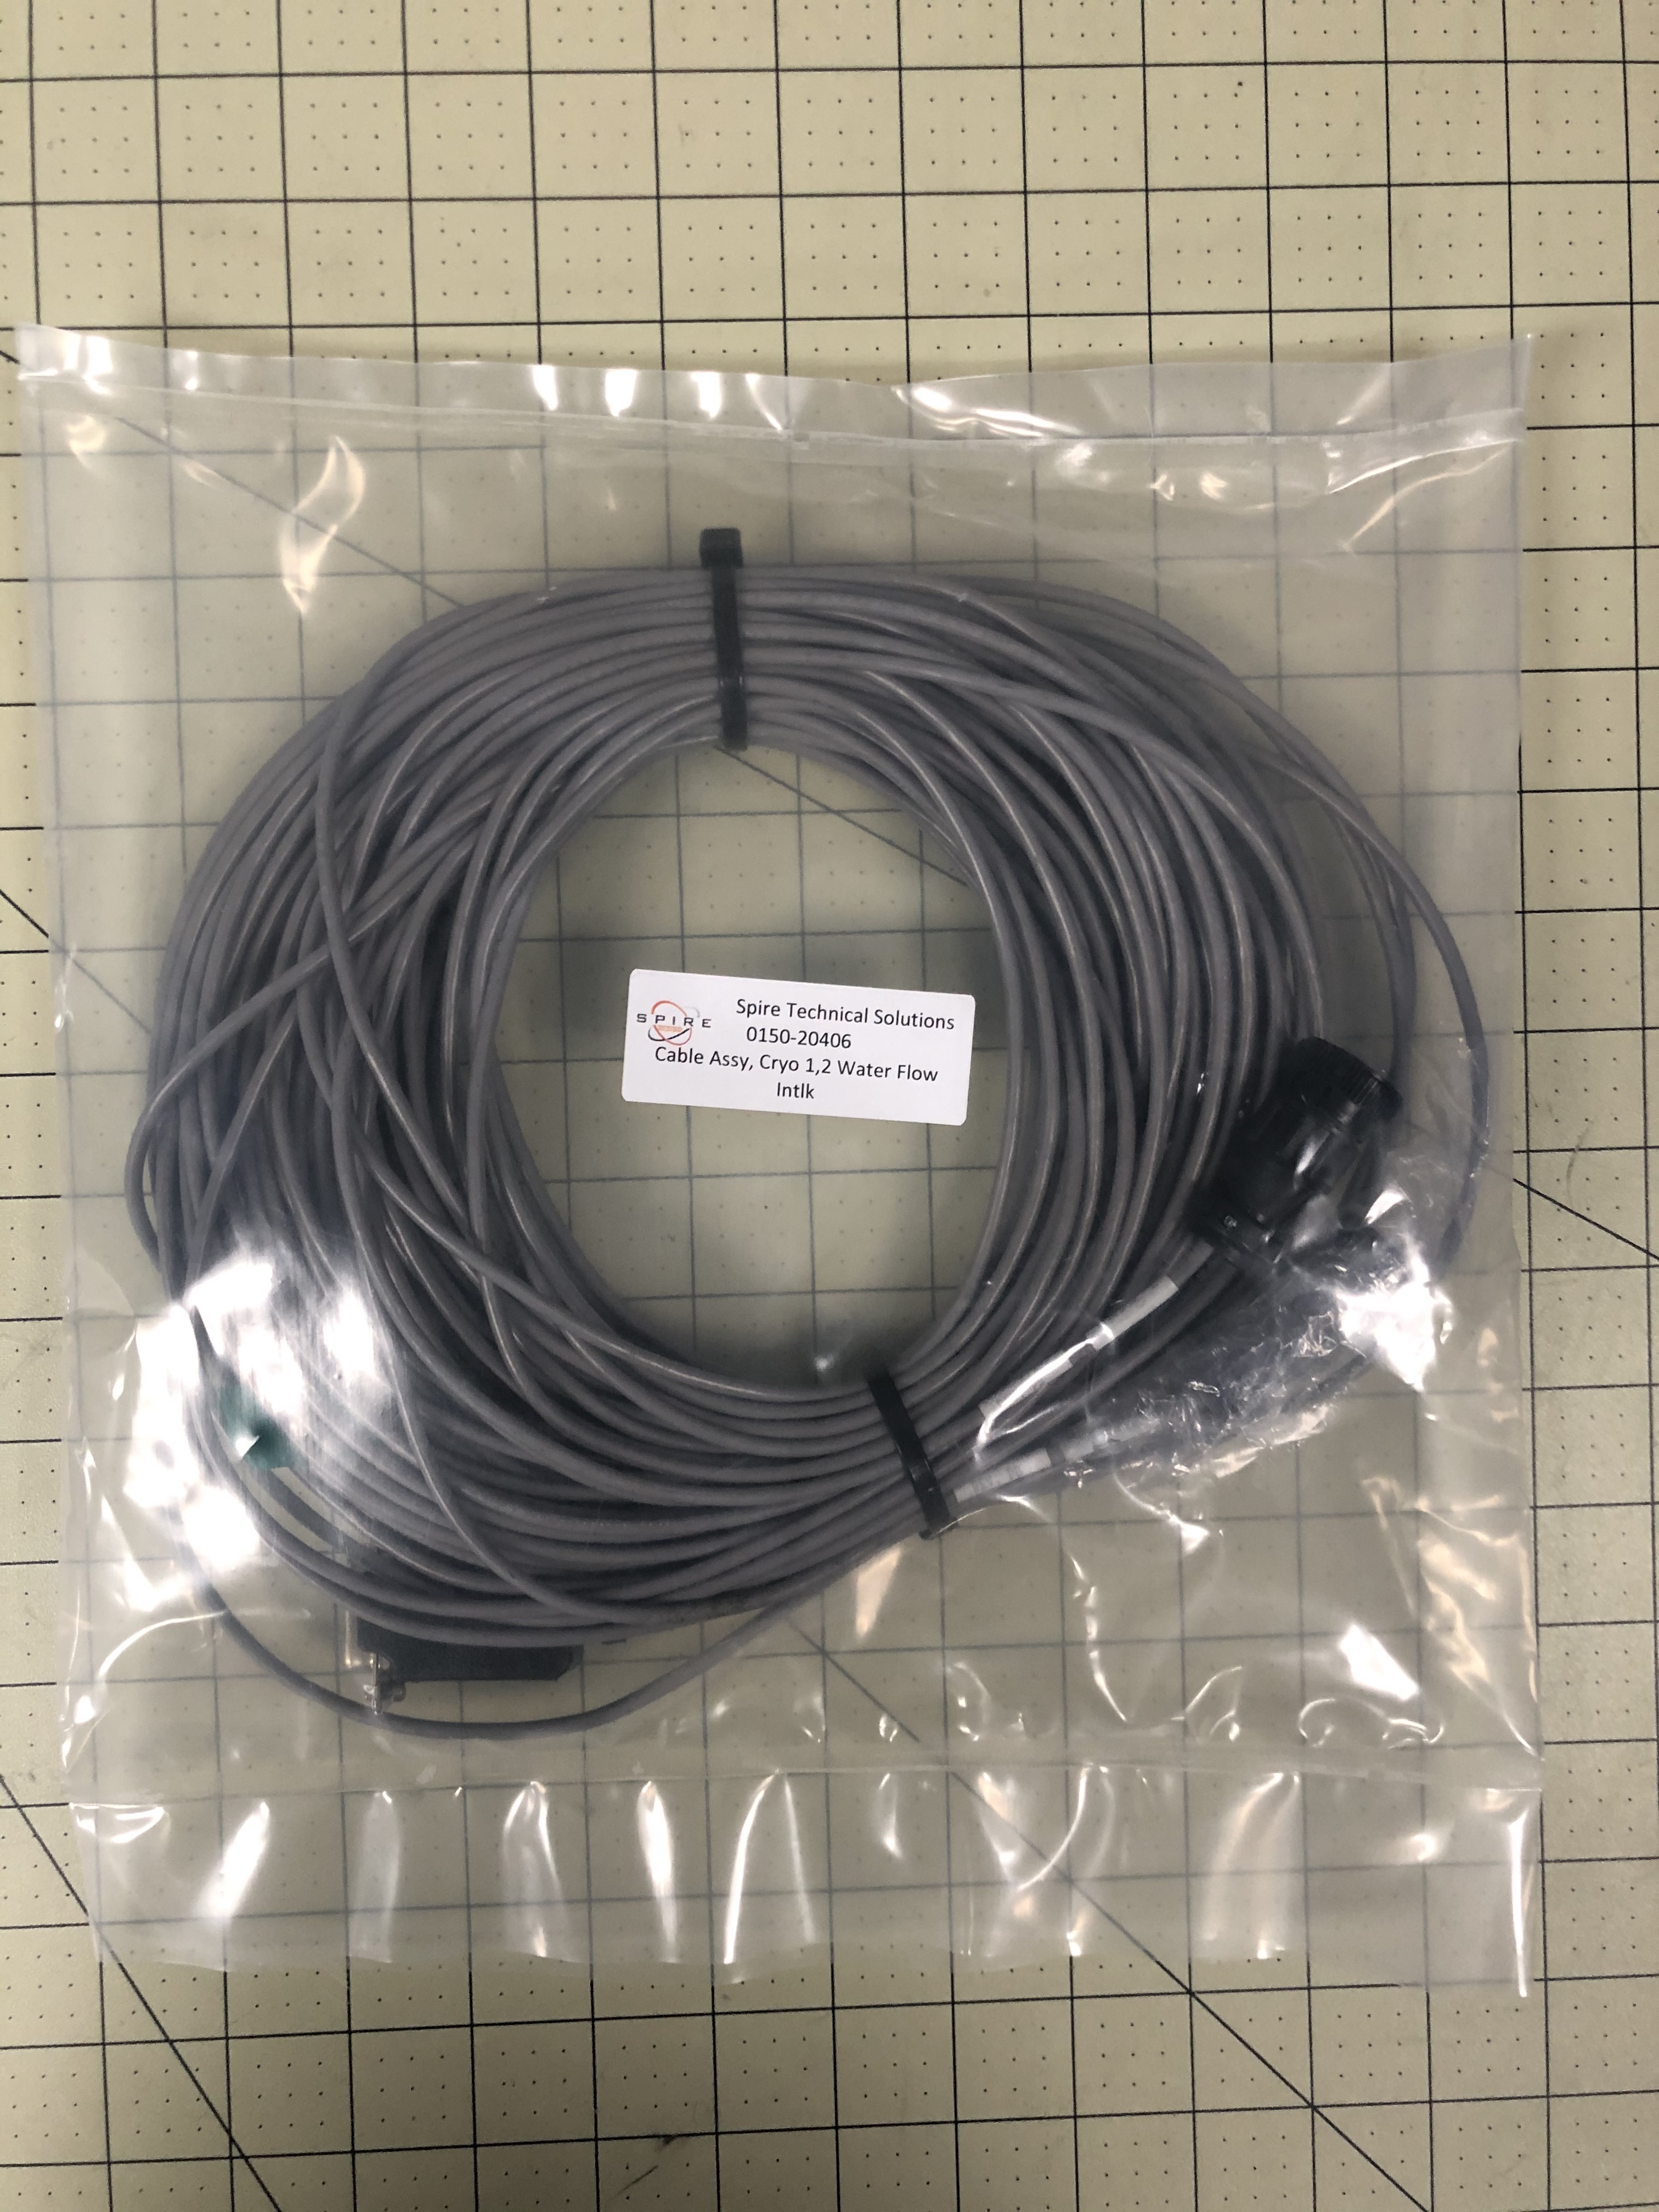 Cable Assy, Cryo 1,2 Water flow Intlk